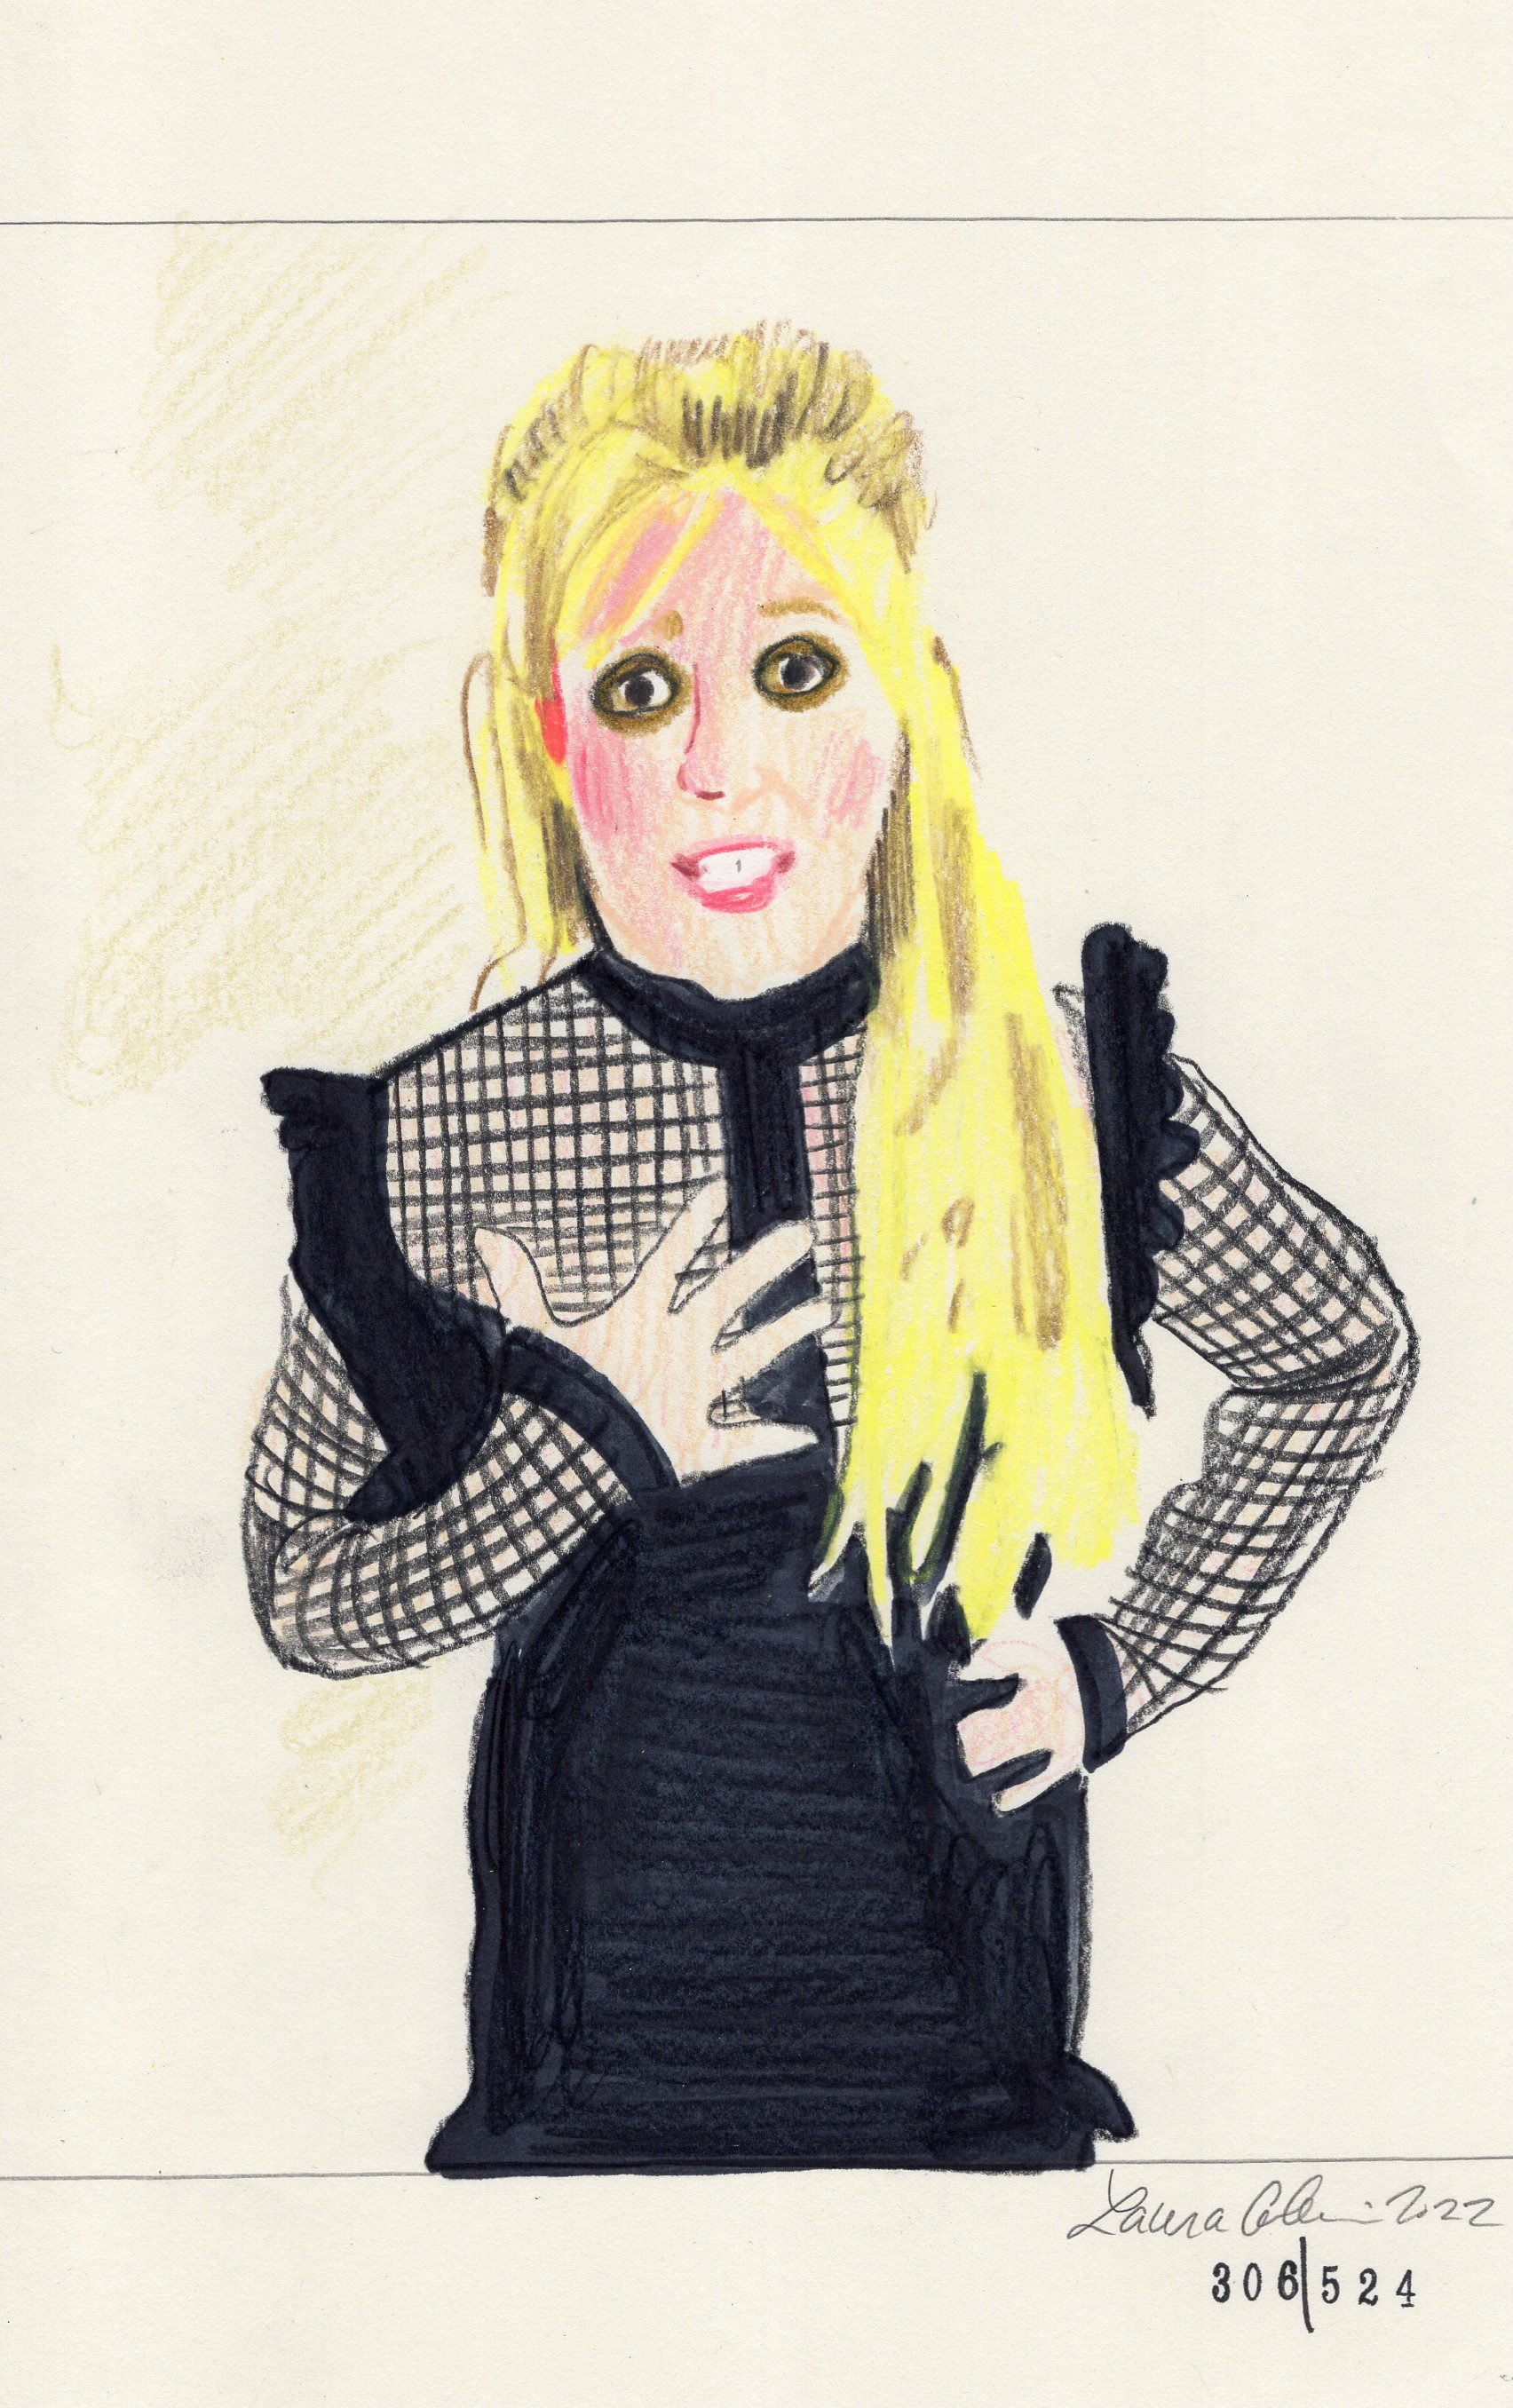 Laura Collins Britney Spears Animation 6x9in mixed media 2022 no306.jpg